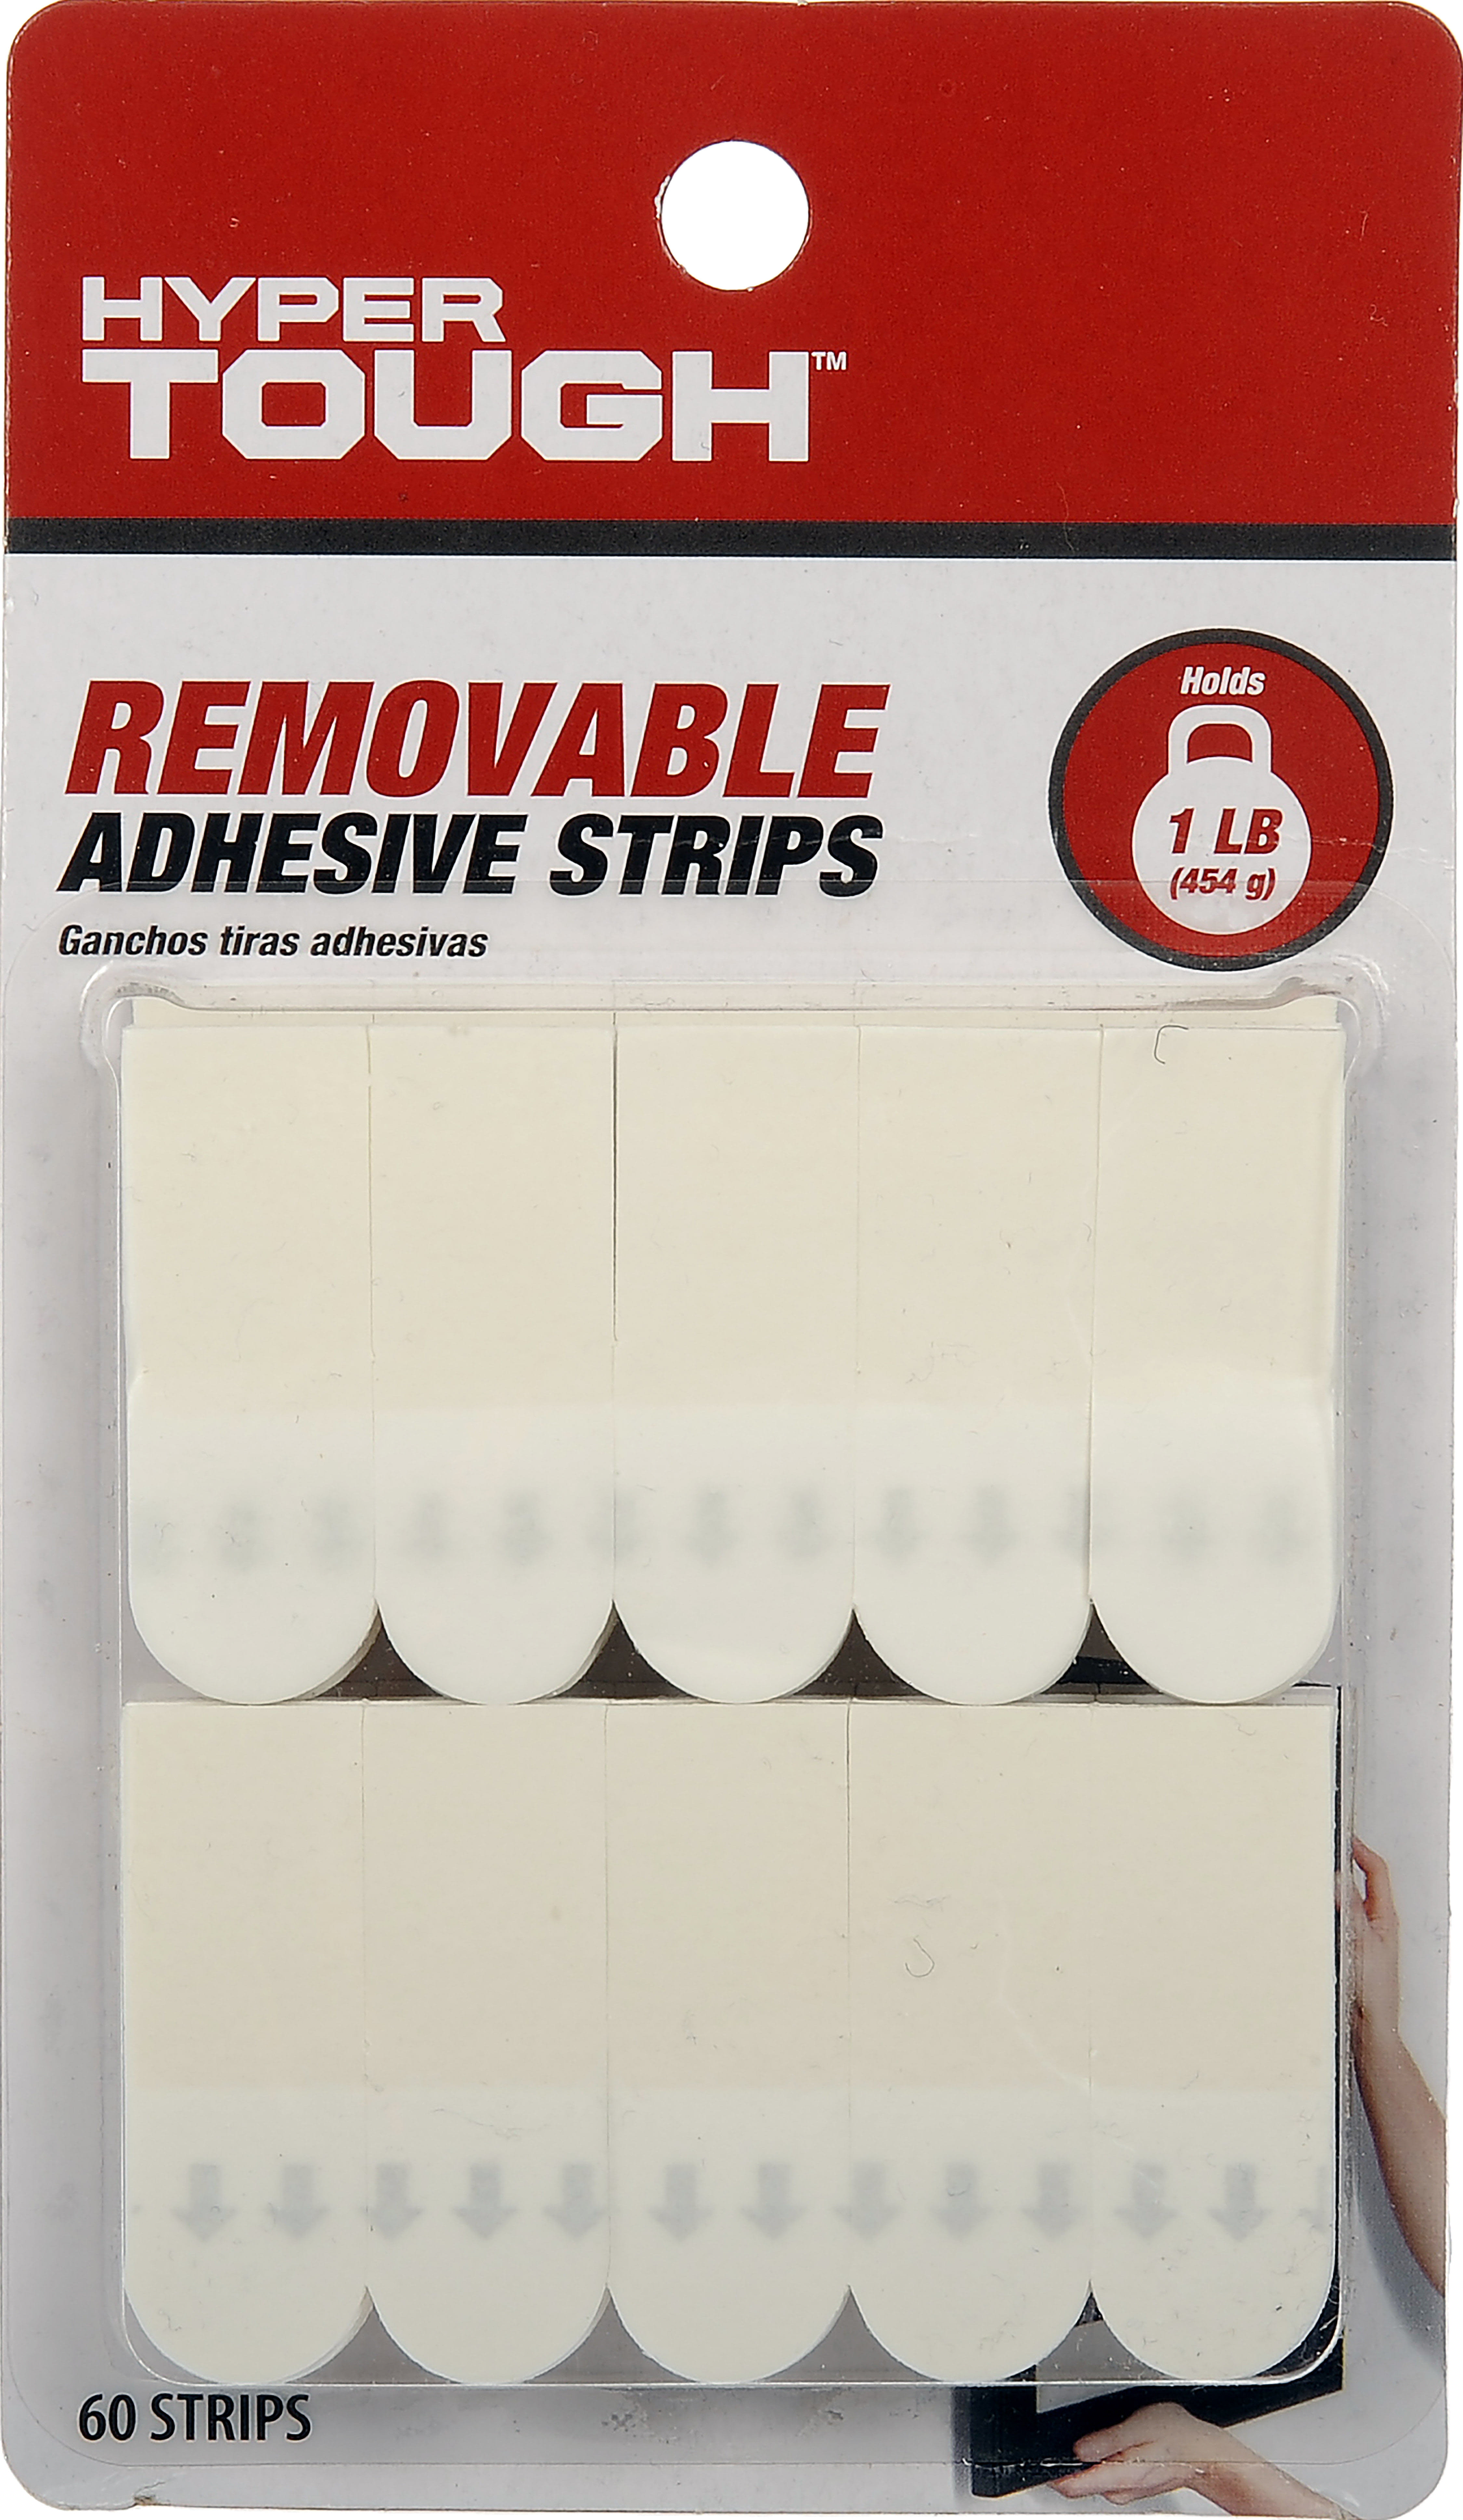 Hyper Tough Removable Adhesive Strips, Large, Holds up to 5 lb., 12 Pair,  White 